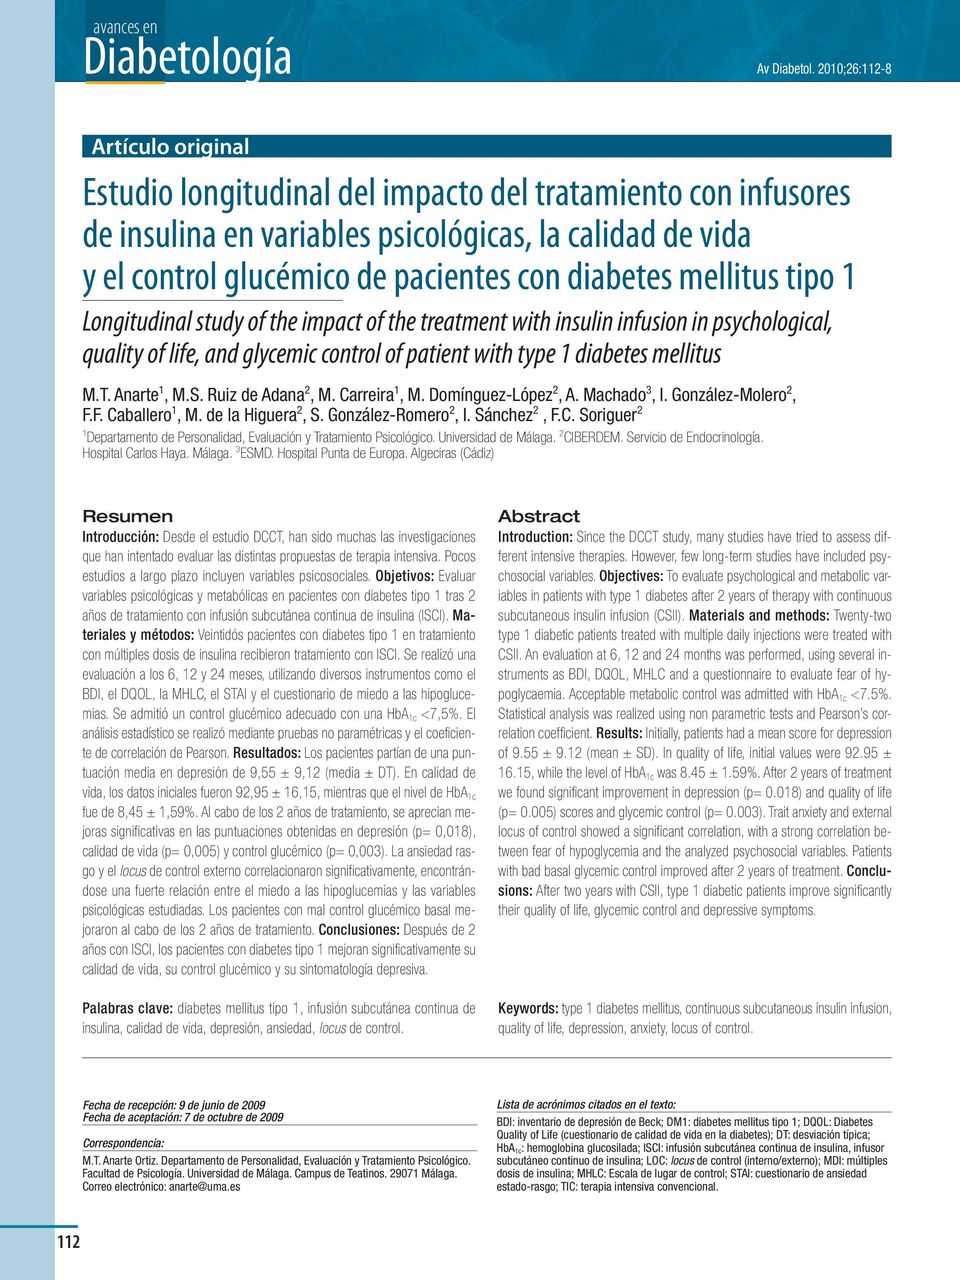 diabetes mellitus tipo 1 Longitudinal study of the impact of the treatment with insulin infusion in psychological, quality of life, and glycemic control of patient with type 1 diabetes mellitus M.T.